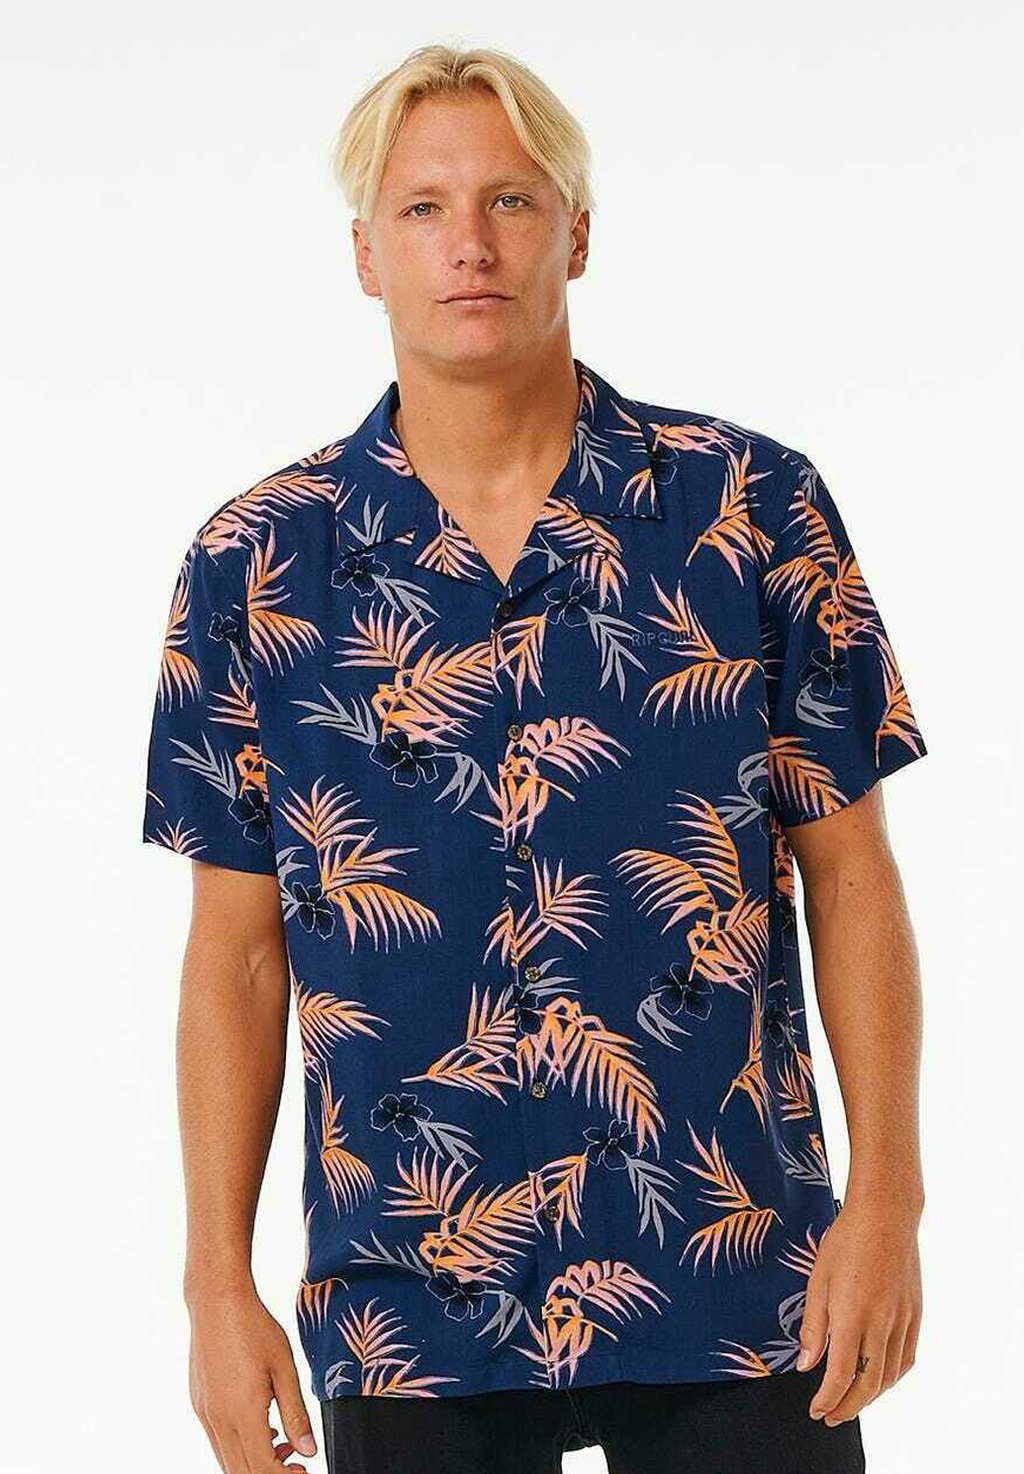 шорты lo fi easy riptop цвет washed navy Рубашка SURF REVIVAL S/S Rip Curl, цвет washed navy